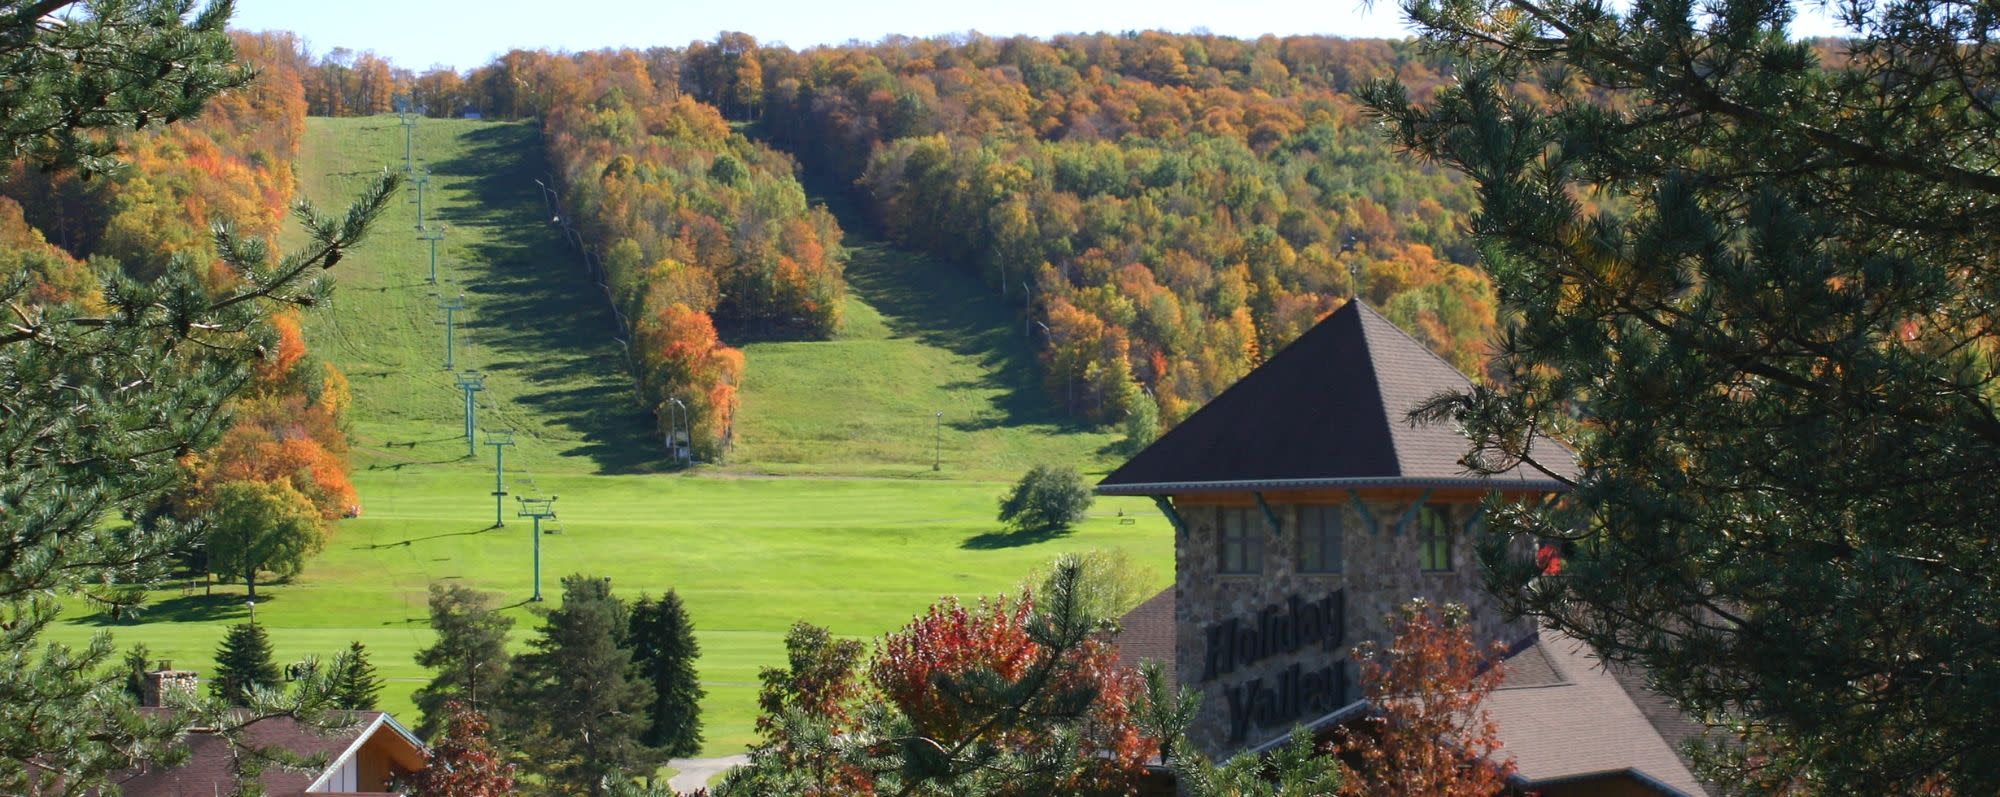 Holiday Valley Resort, Ellicottville - Fall